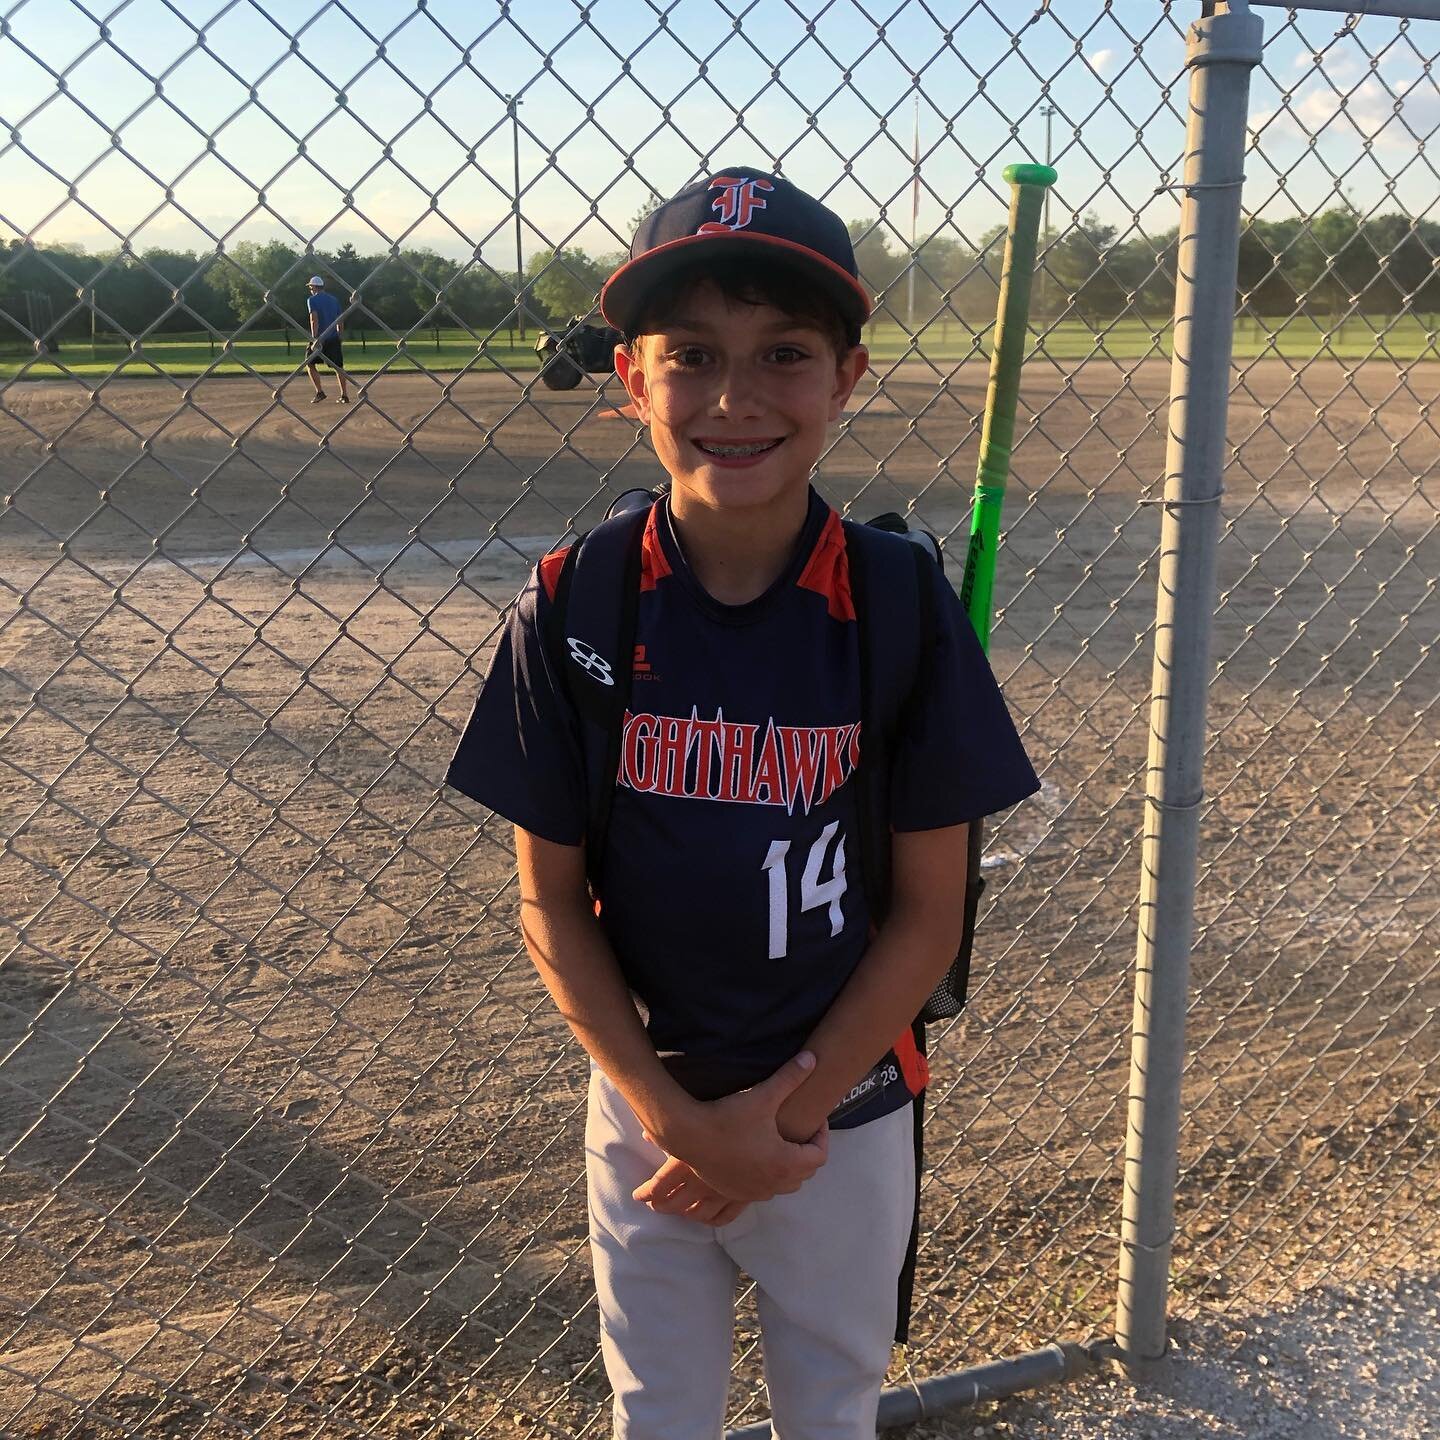 This kid has more team spirit than anyone I know. Win or lose, he&rsquo;s cheering as loud as he can, keeping the energy high, and experiencing the true joy of the game. I&rsquo;ve learned so much from watching him this season. To read more click the